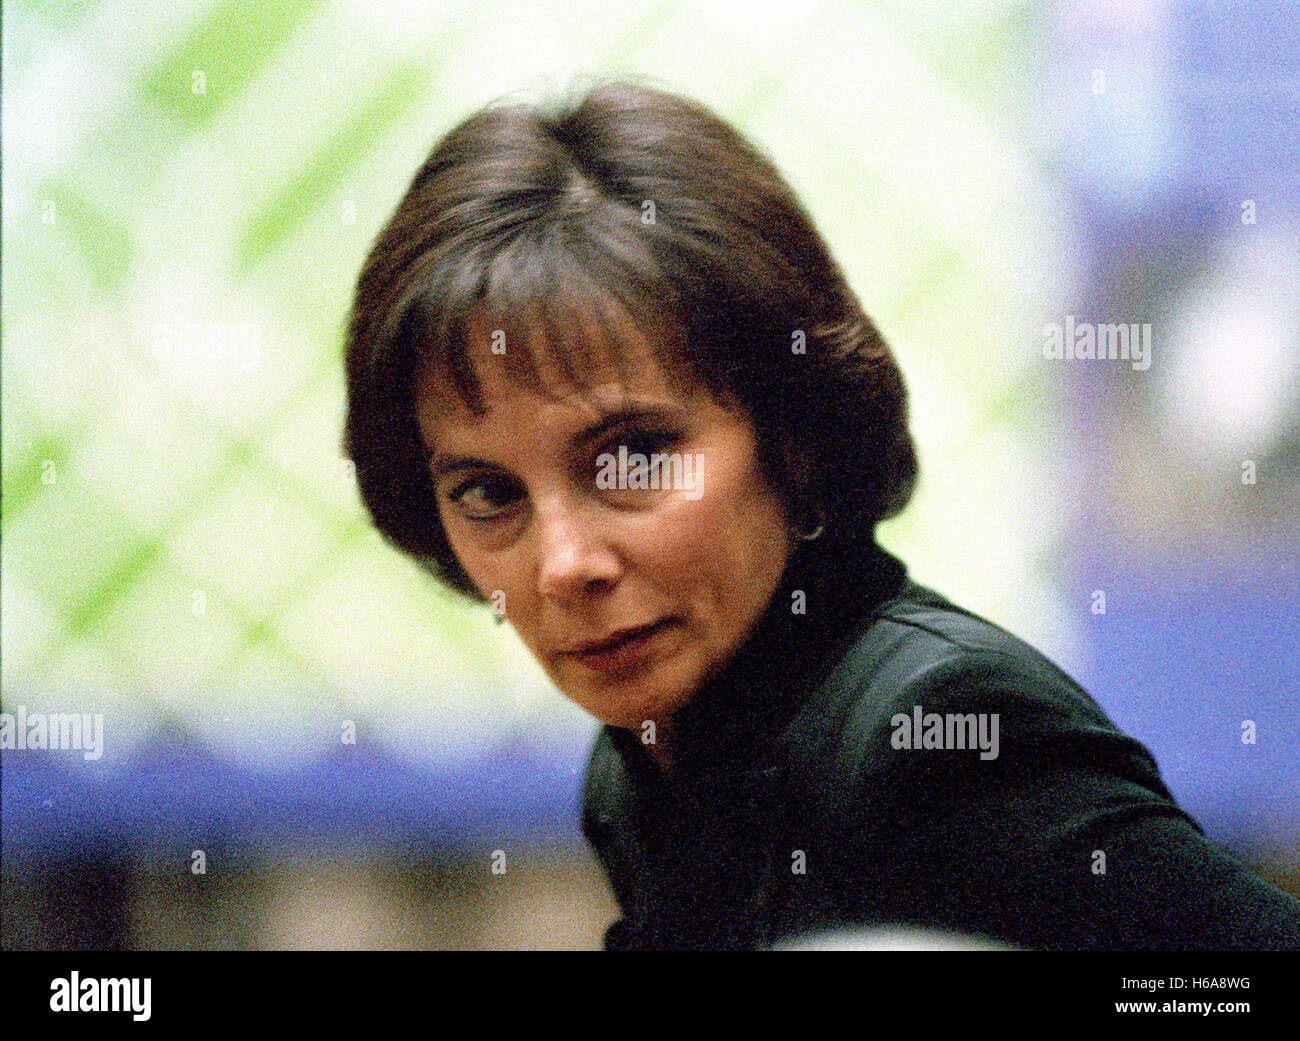 Los Angeles, California, USA. 13th July, 1995. Prosecutor Marcia Clark during the trial of former NFL star running back O.J. Simpson for the murder of his former wife, Nicole Brown Simpson and a friend of hers, restaurant waiter, Ron Goldman in Los Angeles County Superior Court in Los Angeles, California on July 13, 1995.Credit: Steve Grayson/Pool via CNP © Steve Grayson/CNP/ZUMA Wire/Alamy Live News Stock Photo